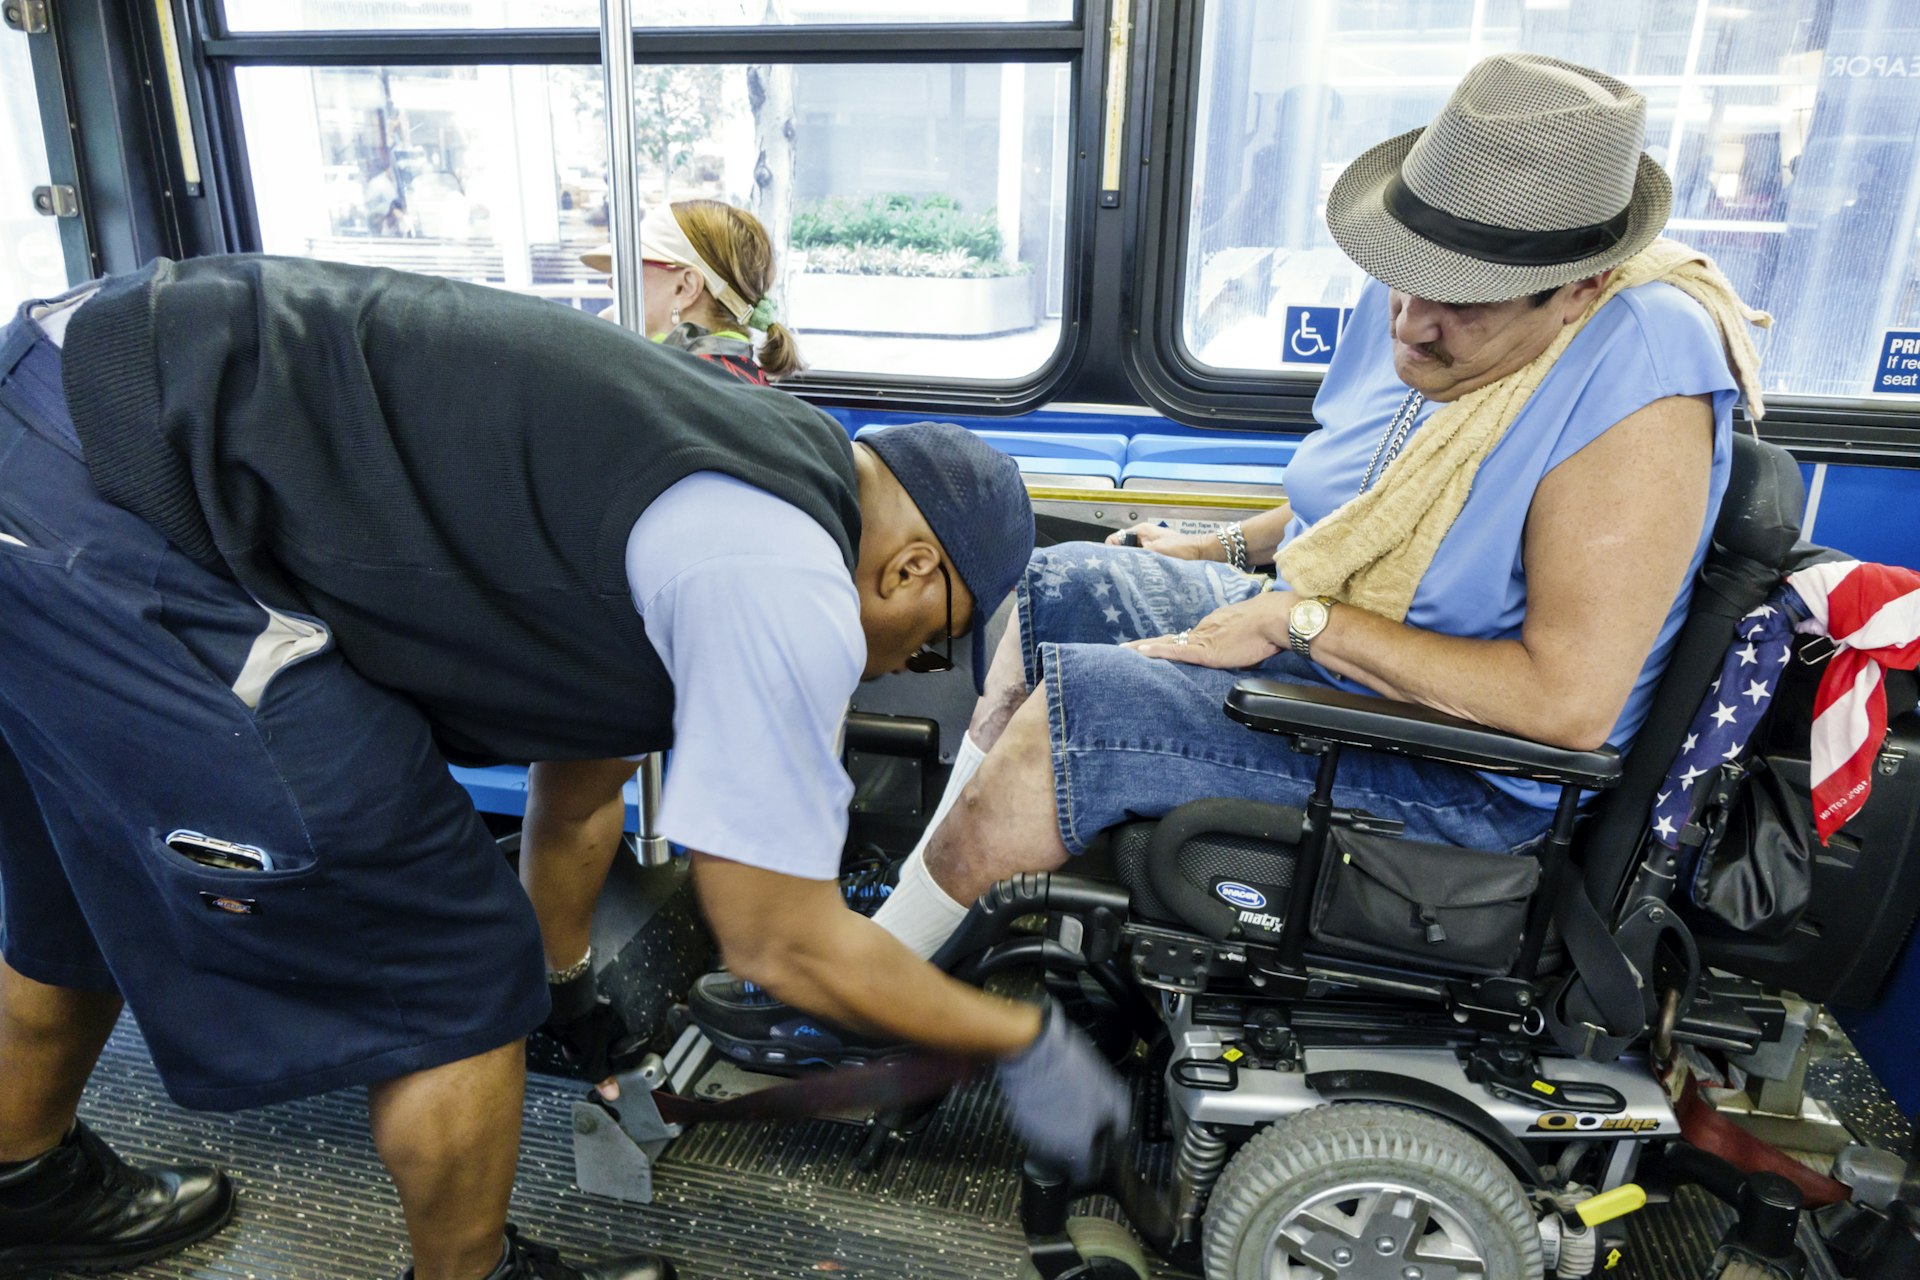 A driver helping secure an electric wheelchair on a bus 